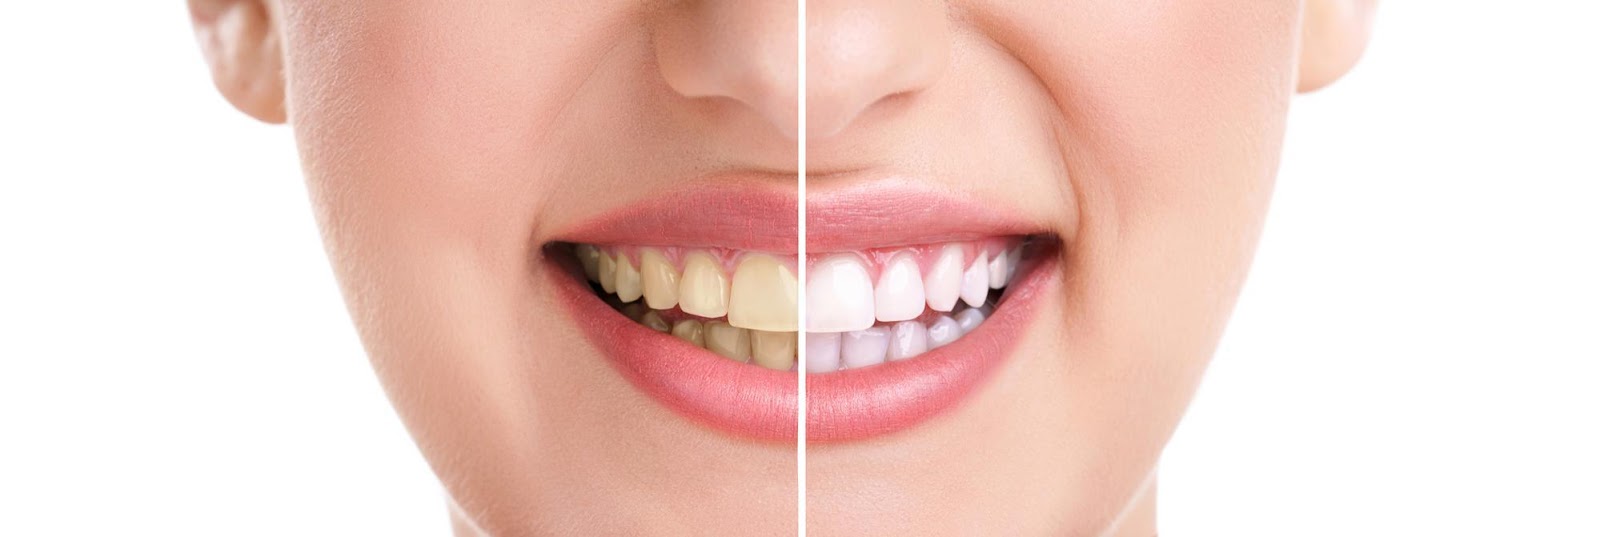 Teeth Whitening Options For Your Type Of Dental Stains